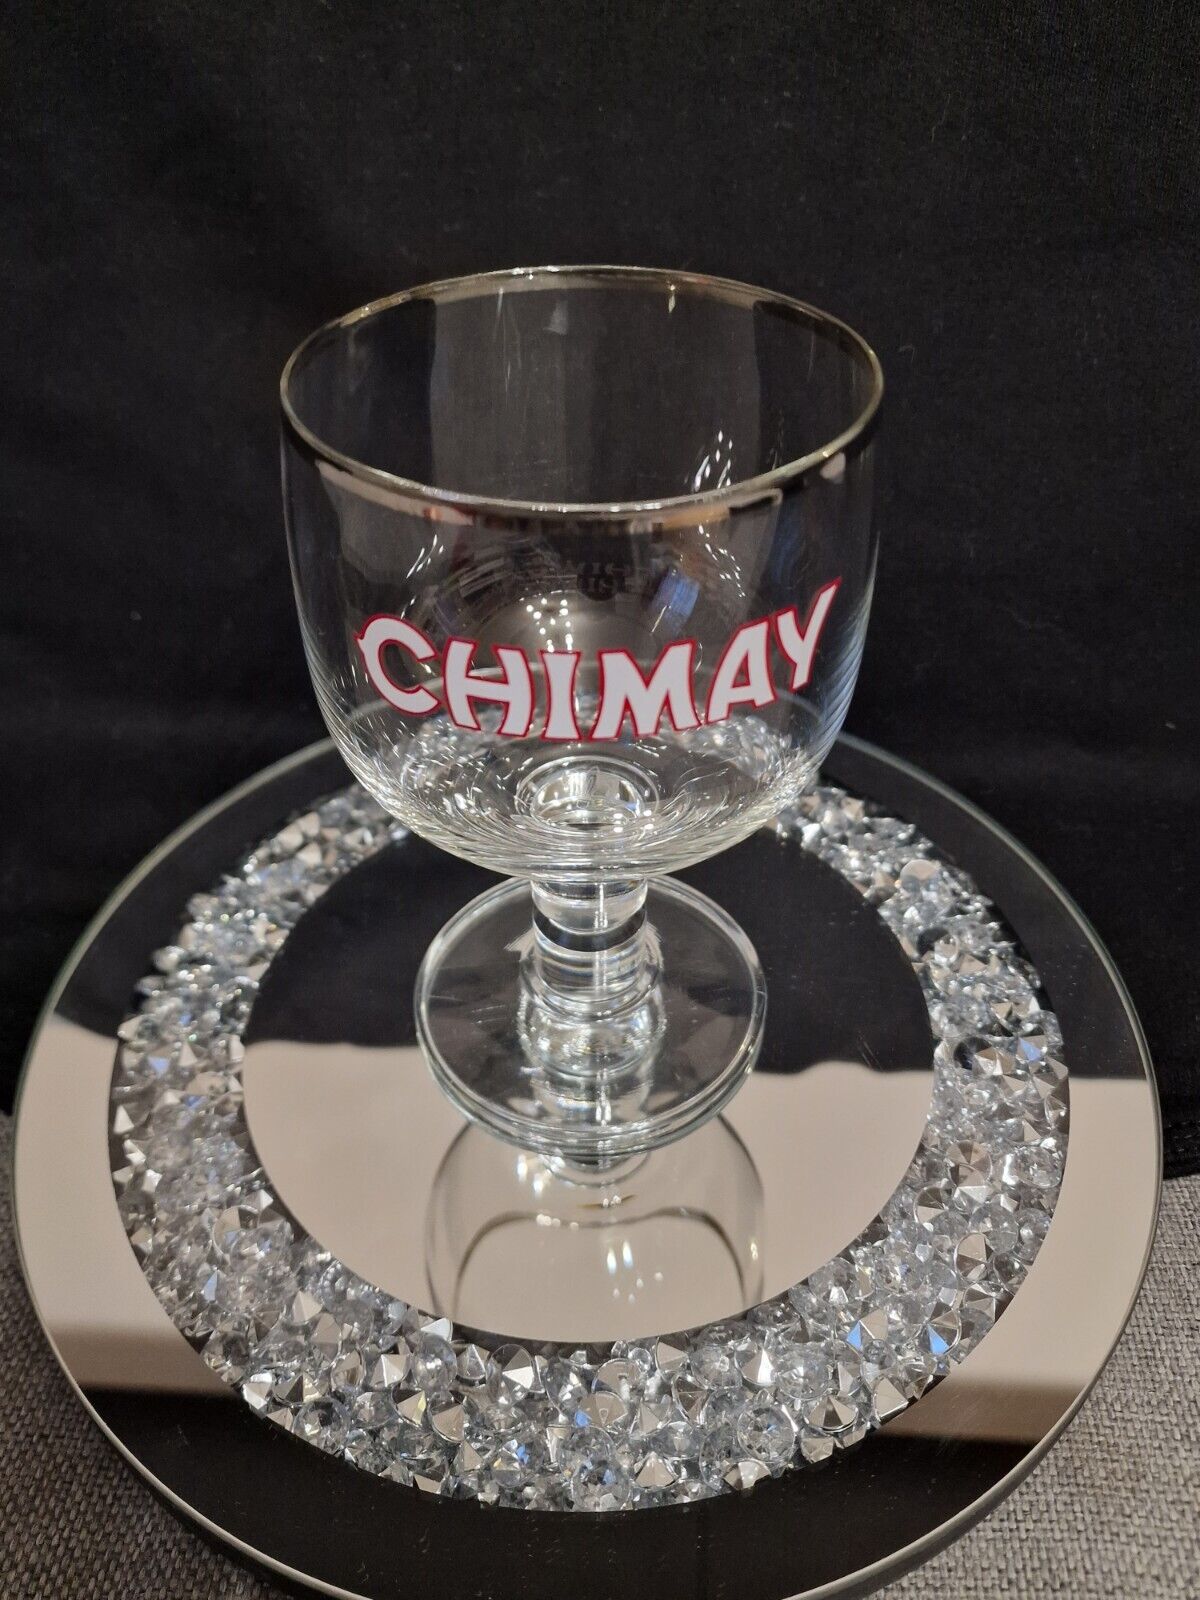 CHIMAY NUCLEATED 33cl Belgian Beer Glass. Brand new.